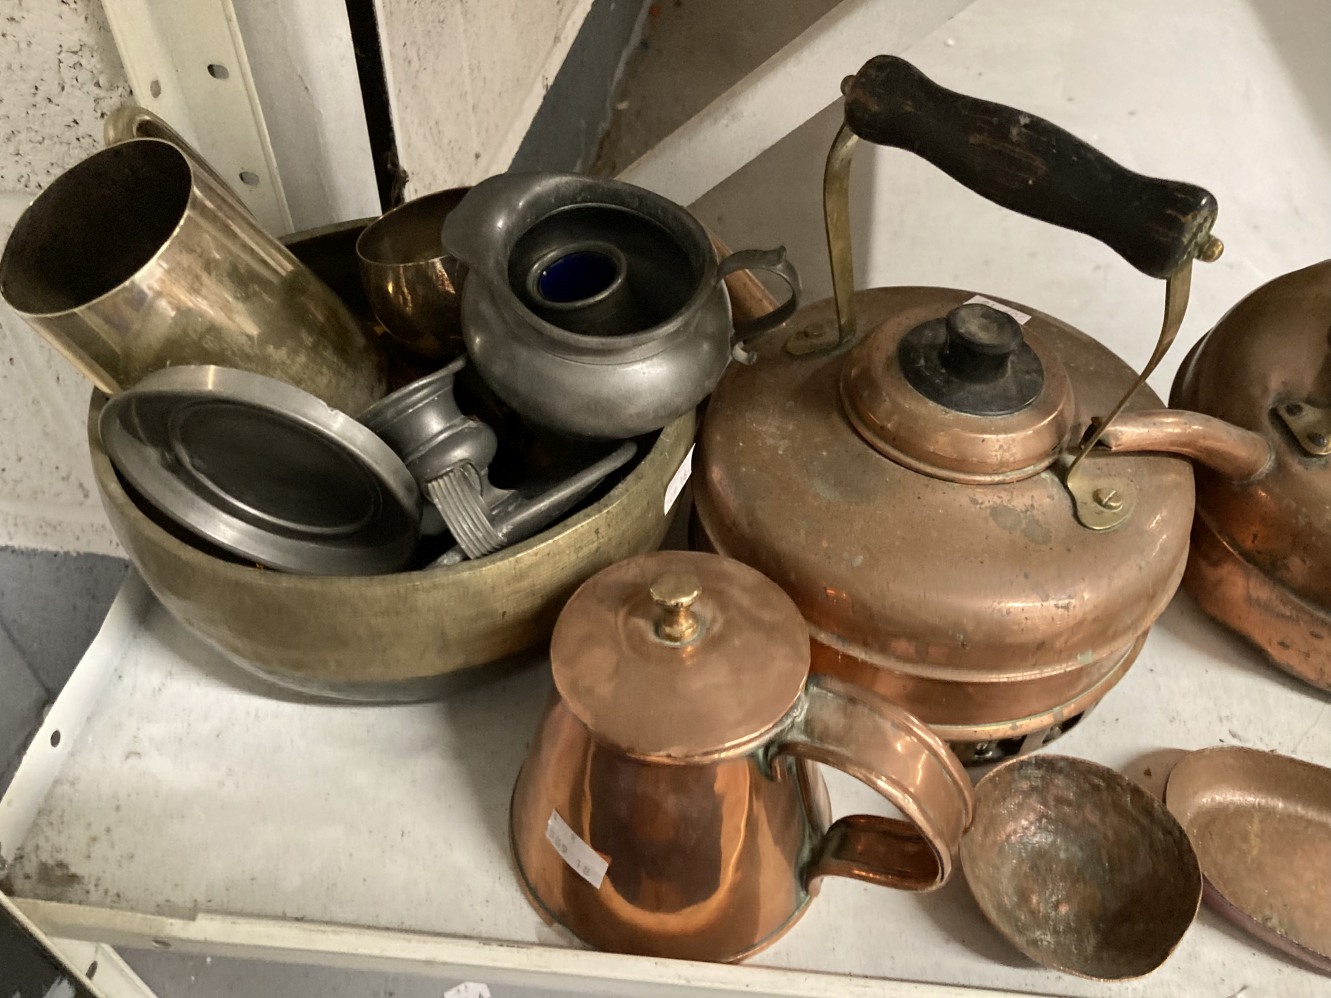 19th/20th cent. Metalware: Copper kettles x 2, chocolate and other pots, decorative mugs x 2, dishes - Bild 2 aus 3